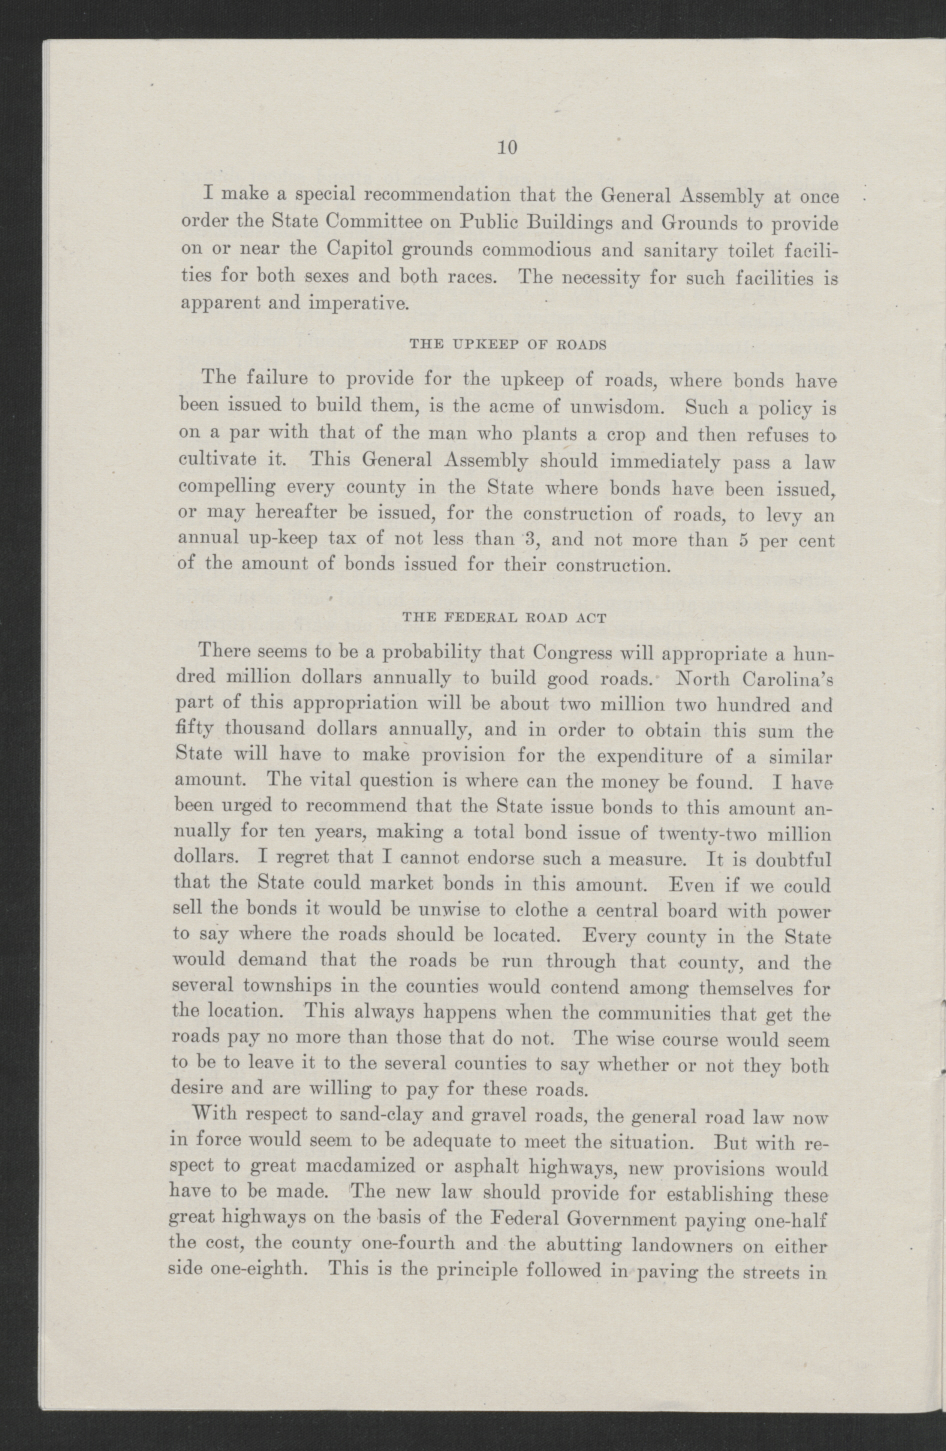 Biennial Message of Governor Thomas W. Bickett to the General Assembly, January 9, 1919, page 8